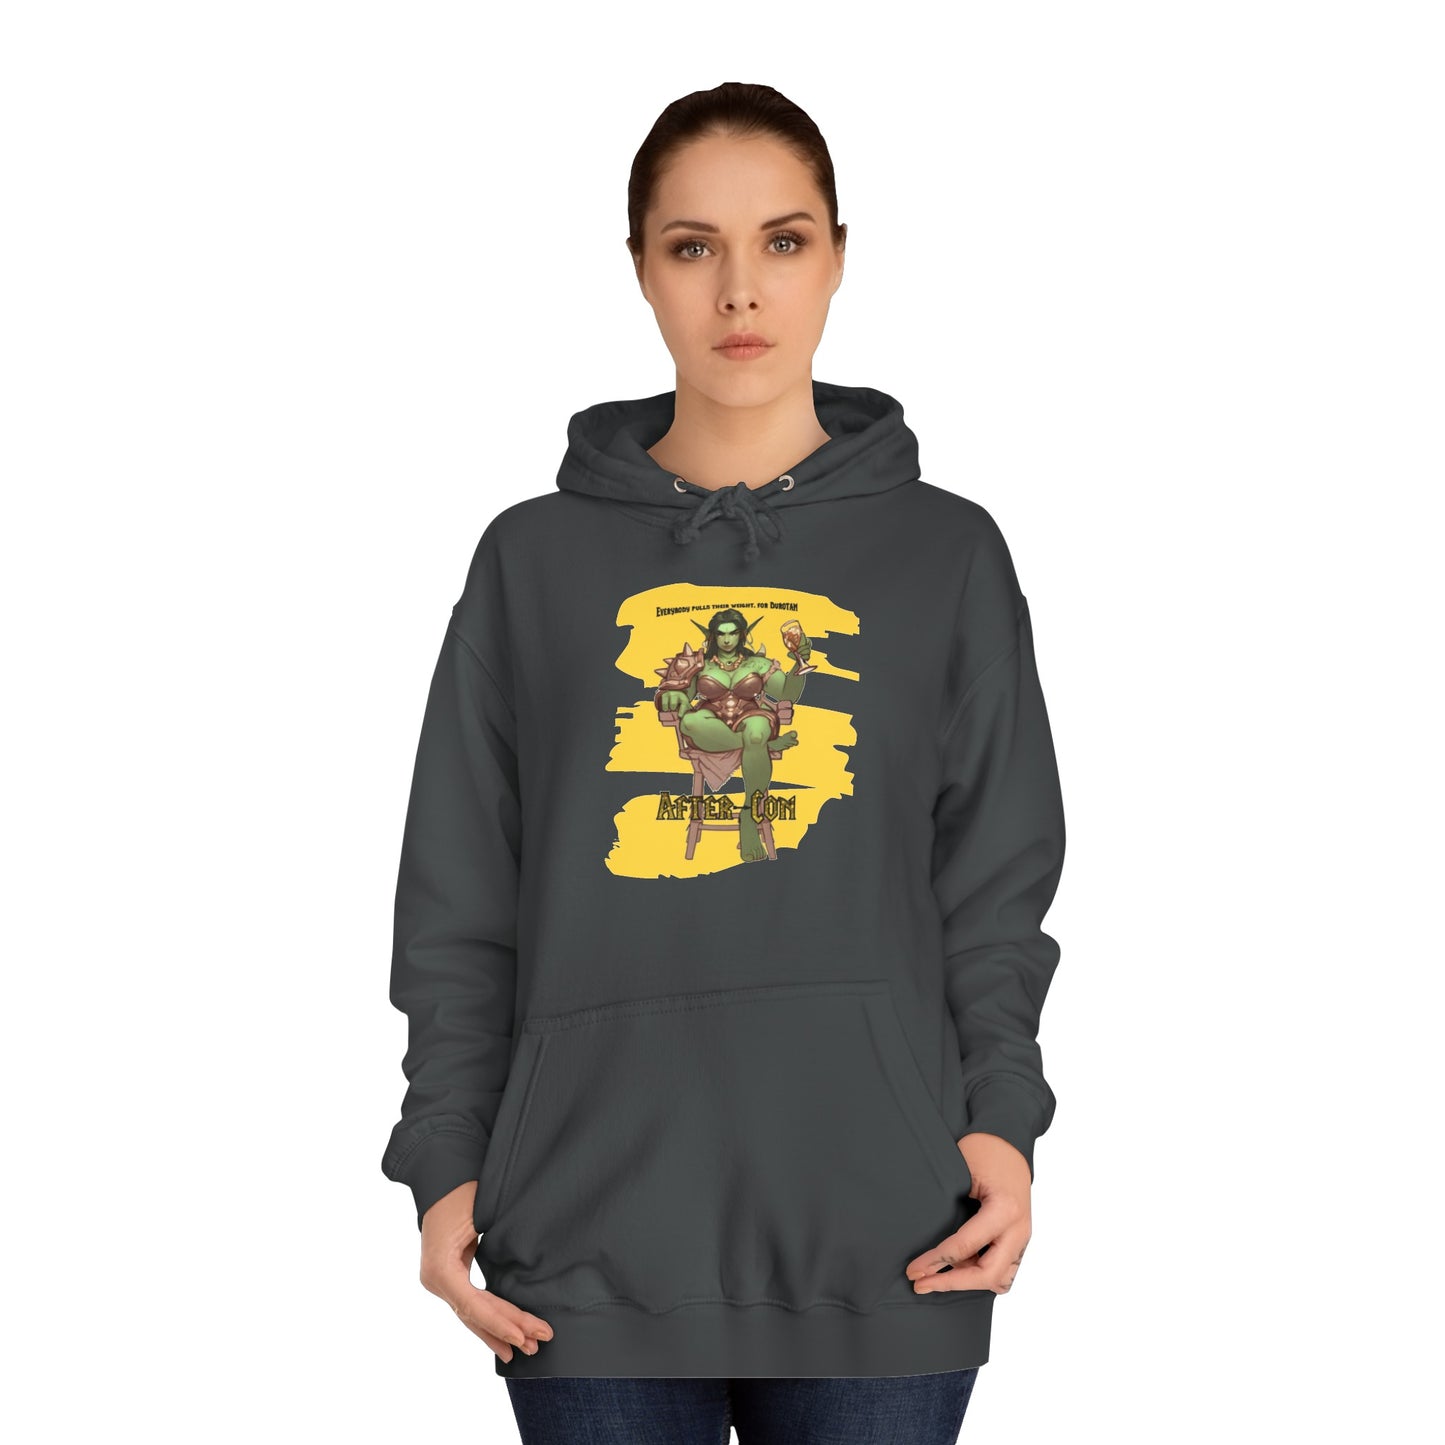 After-Con "Everyone Pulls" Unisex College Hoodie